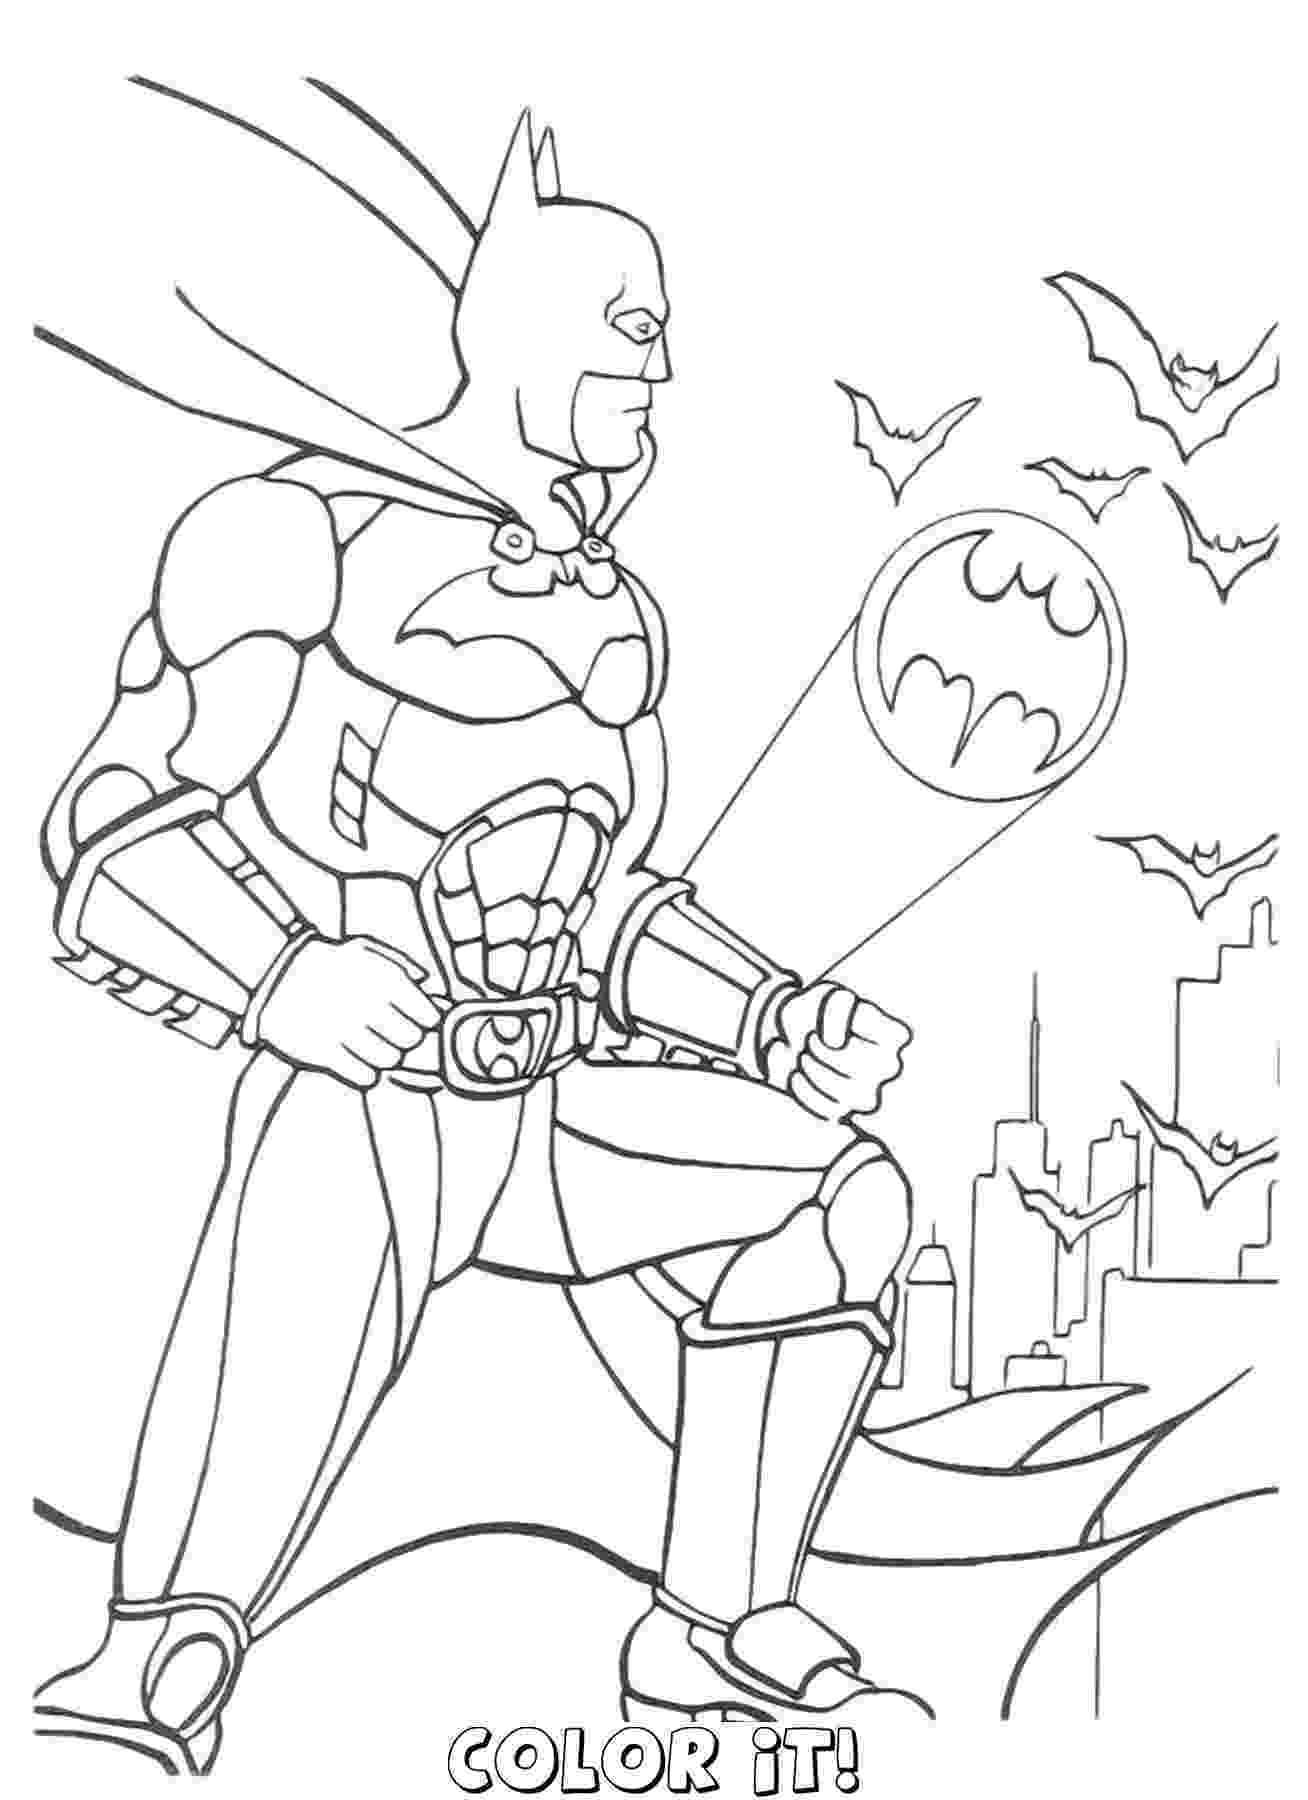 free coloring pages download batman and robin coloring pages to download and print for free coloring pages free download 